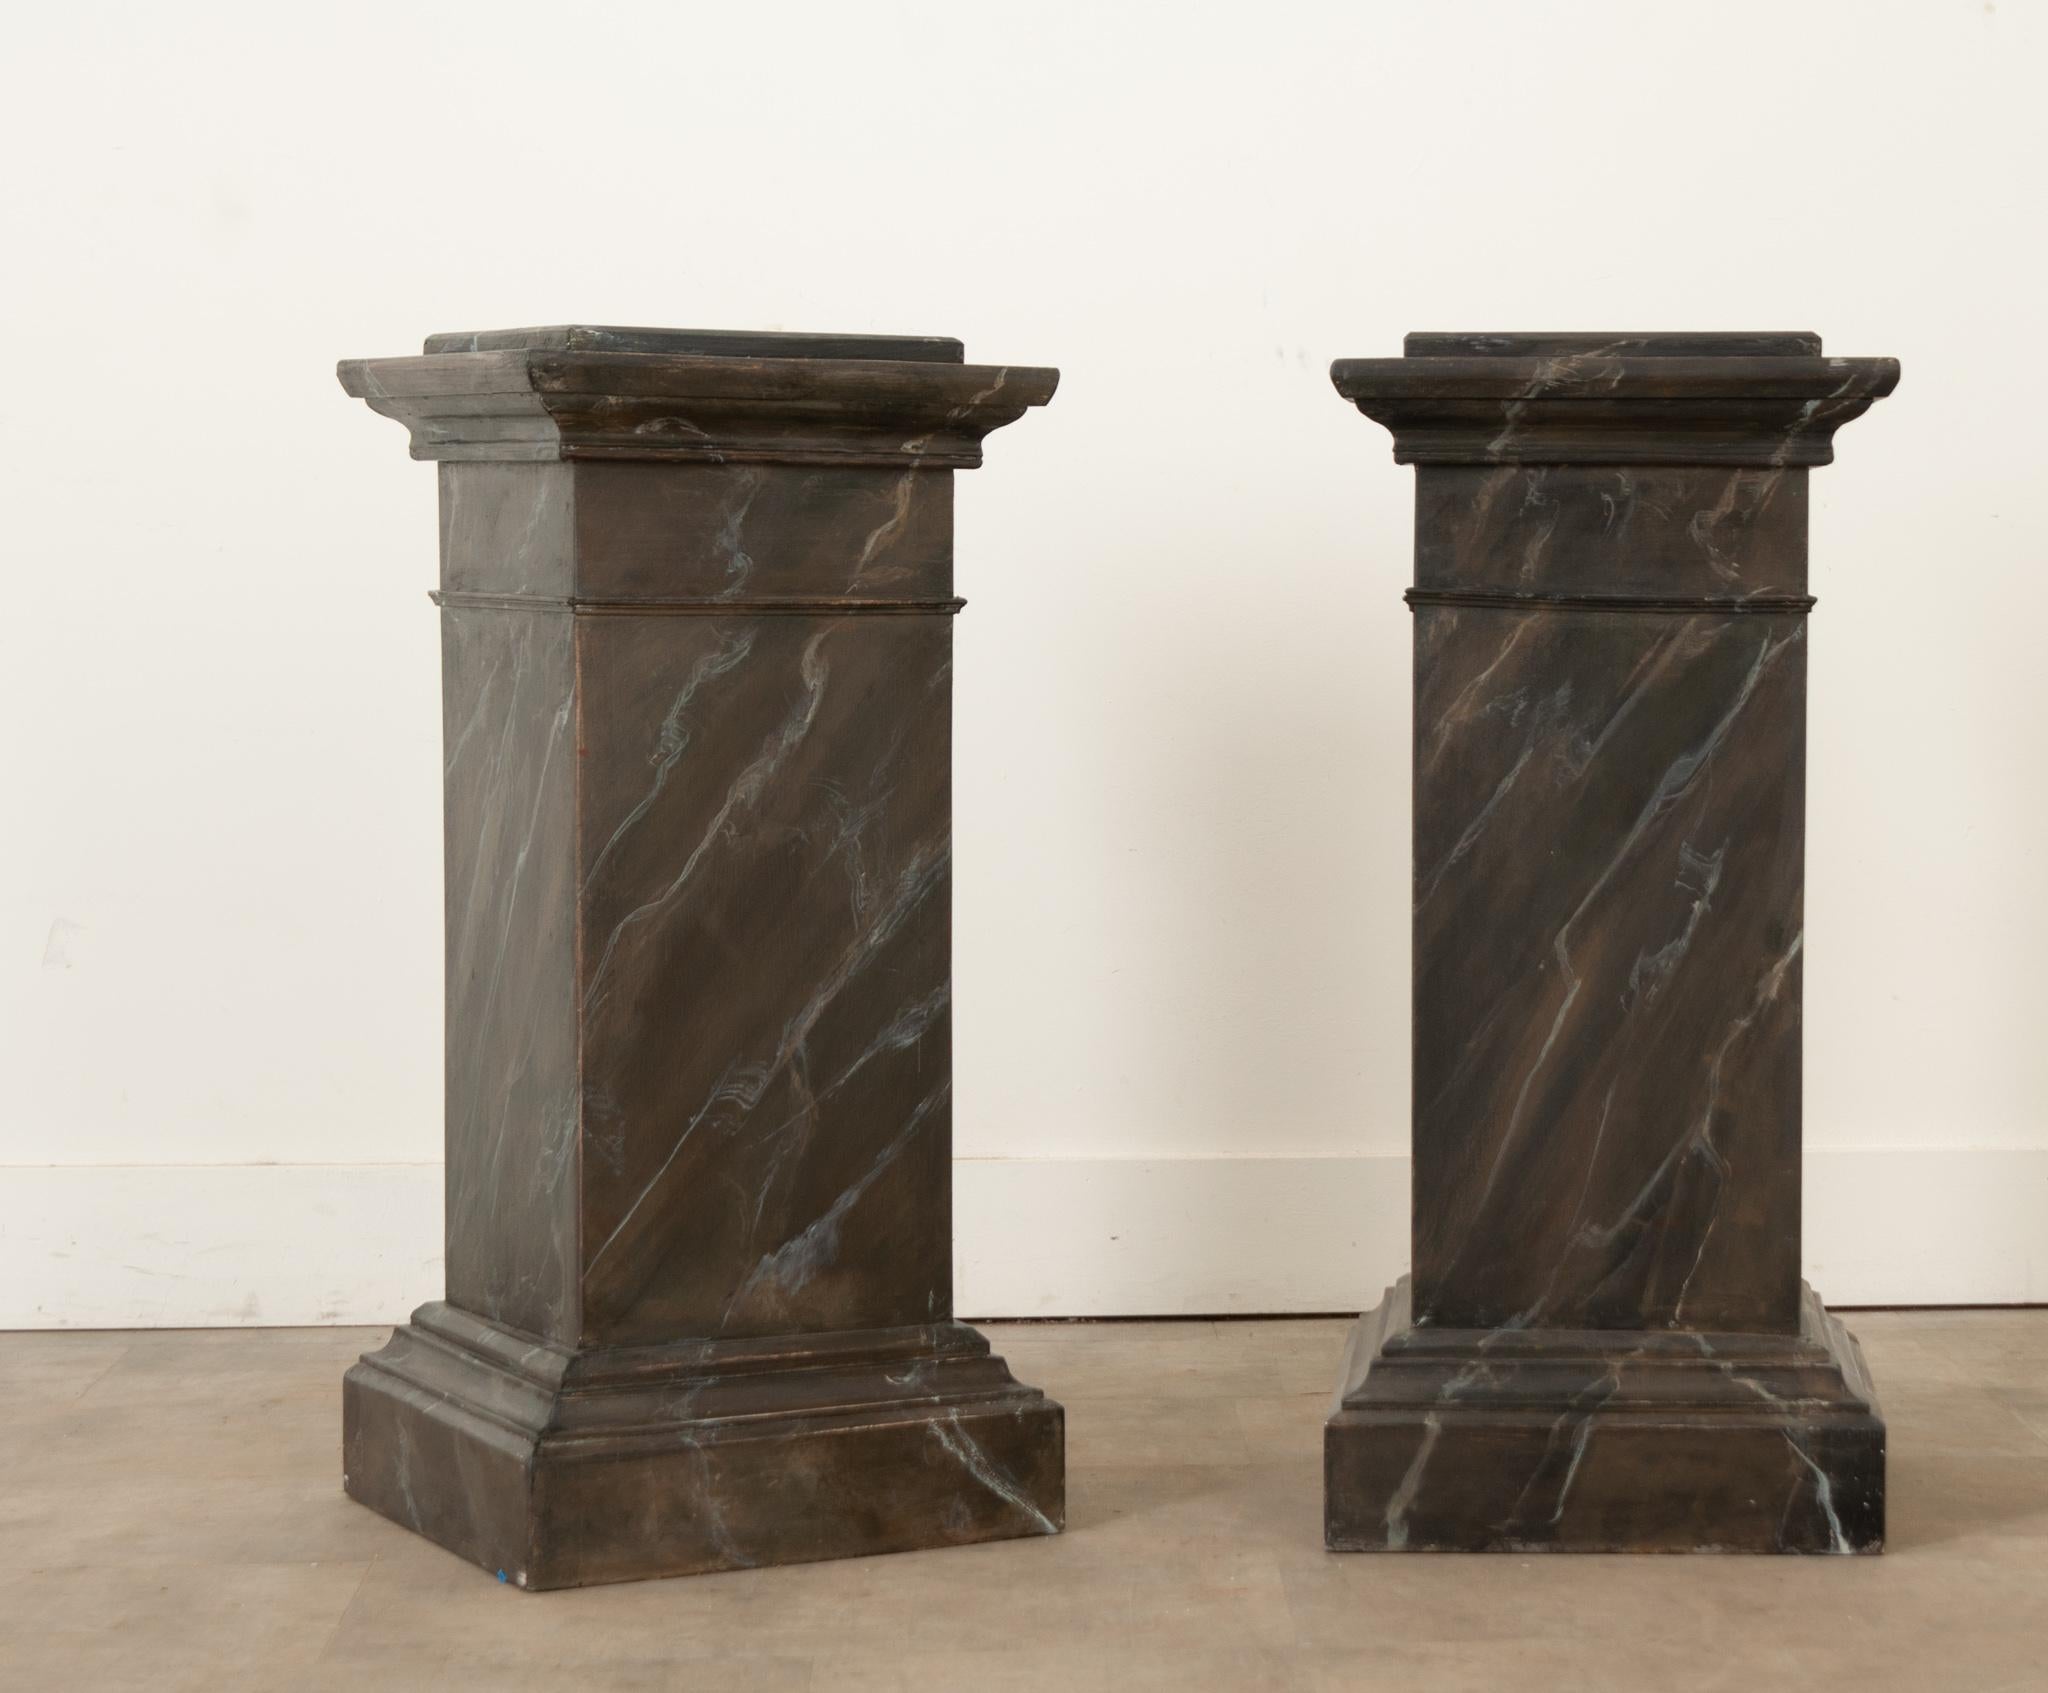 A pair of recently made poplar wood pedestals in a classical design. Faux painted marble in just the right color. Be sure to view the detailed images to see these works of art.